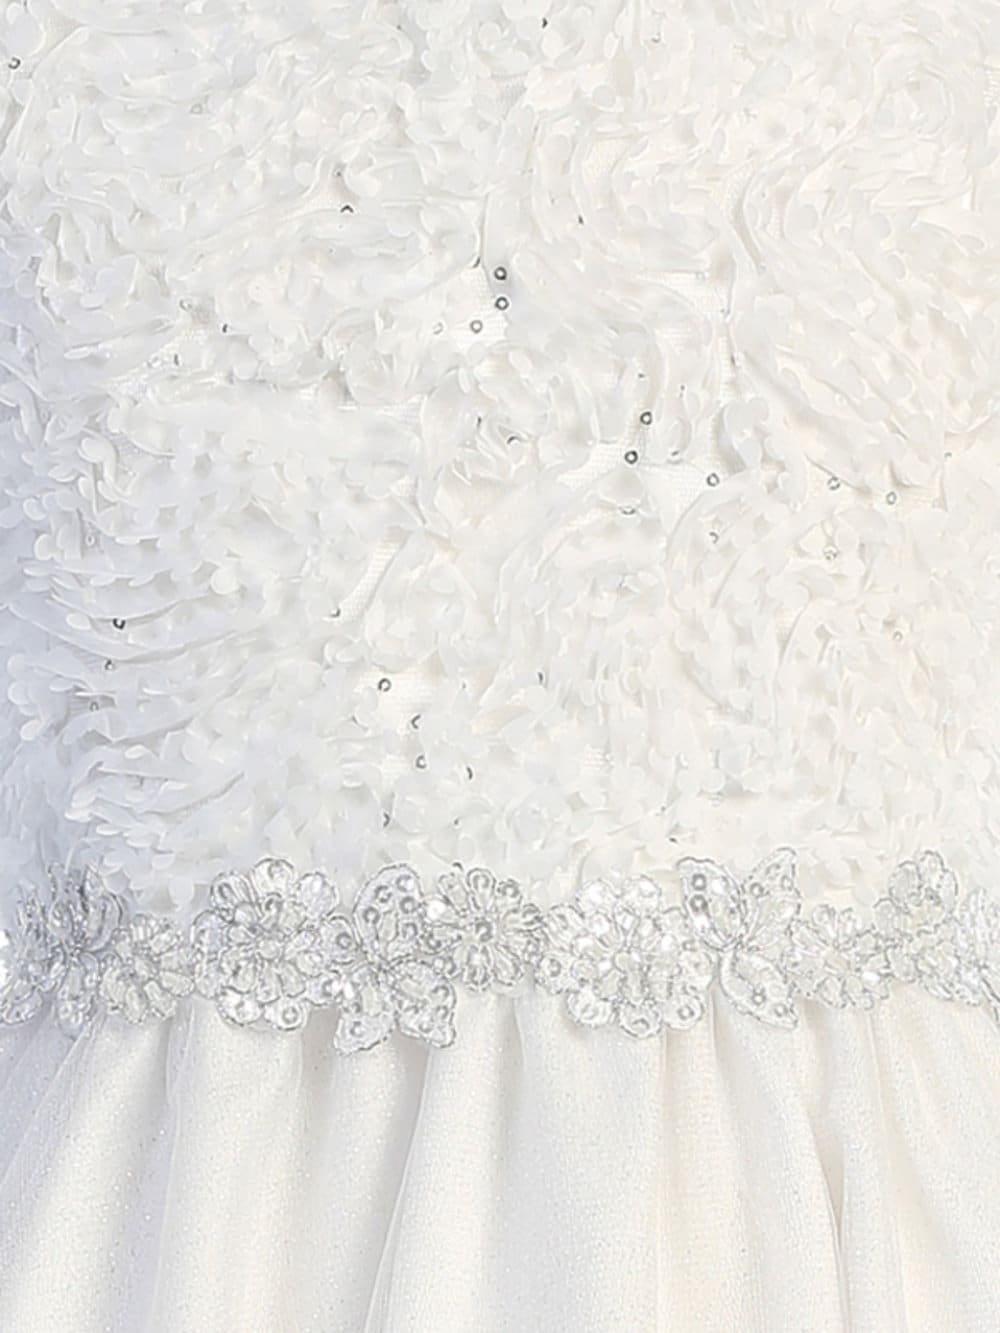 Close-up view of the sequined bodice with chiffon laser cut on tulle, showcasing the intricate details and glitter.